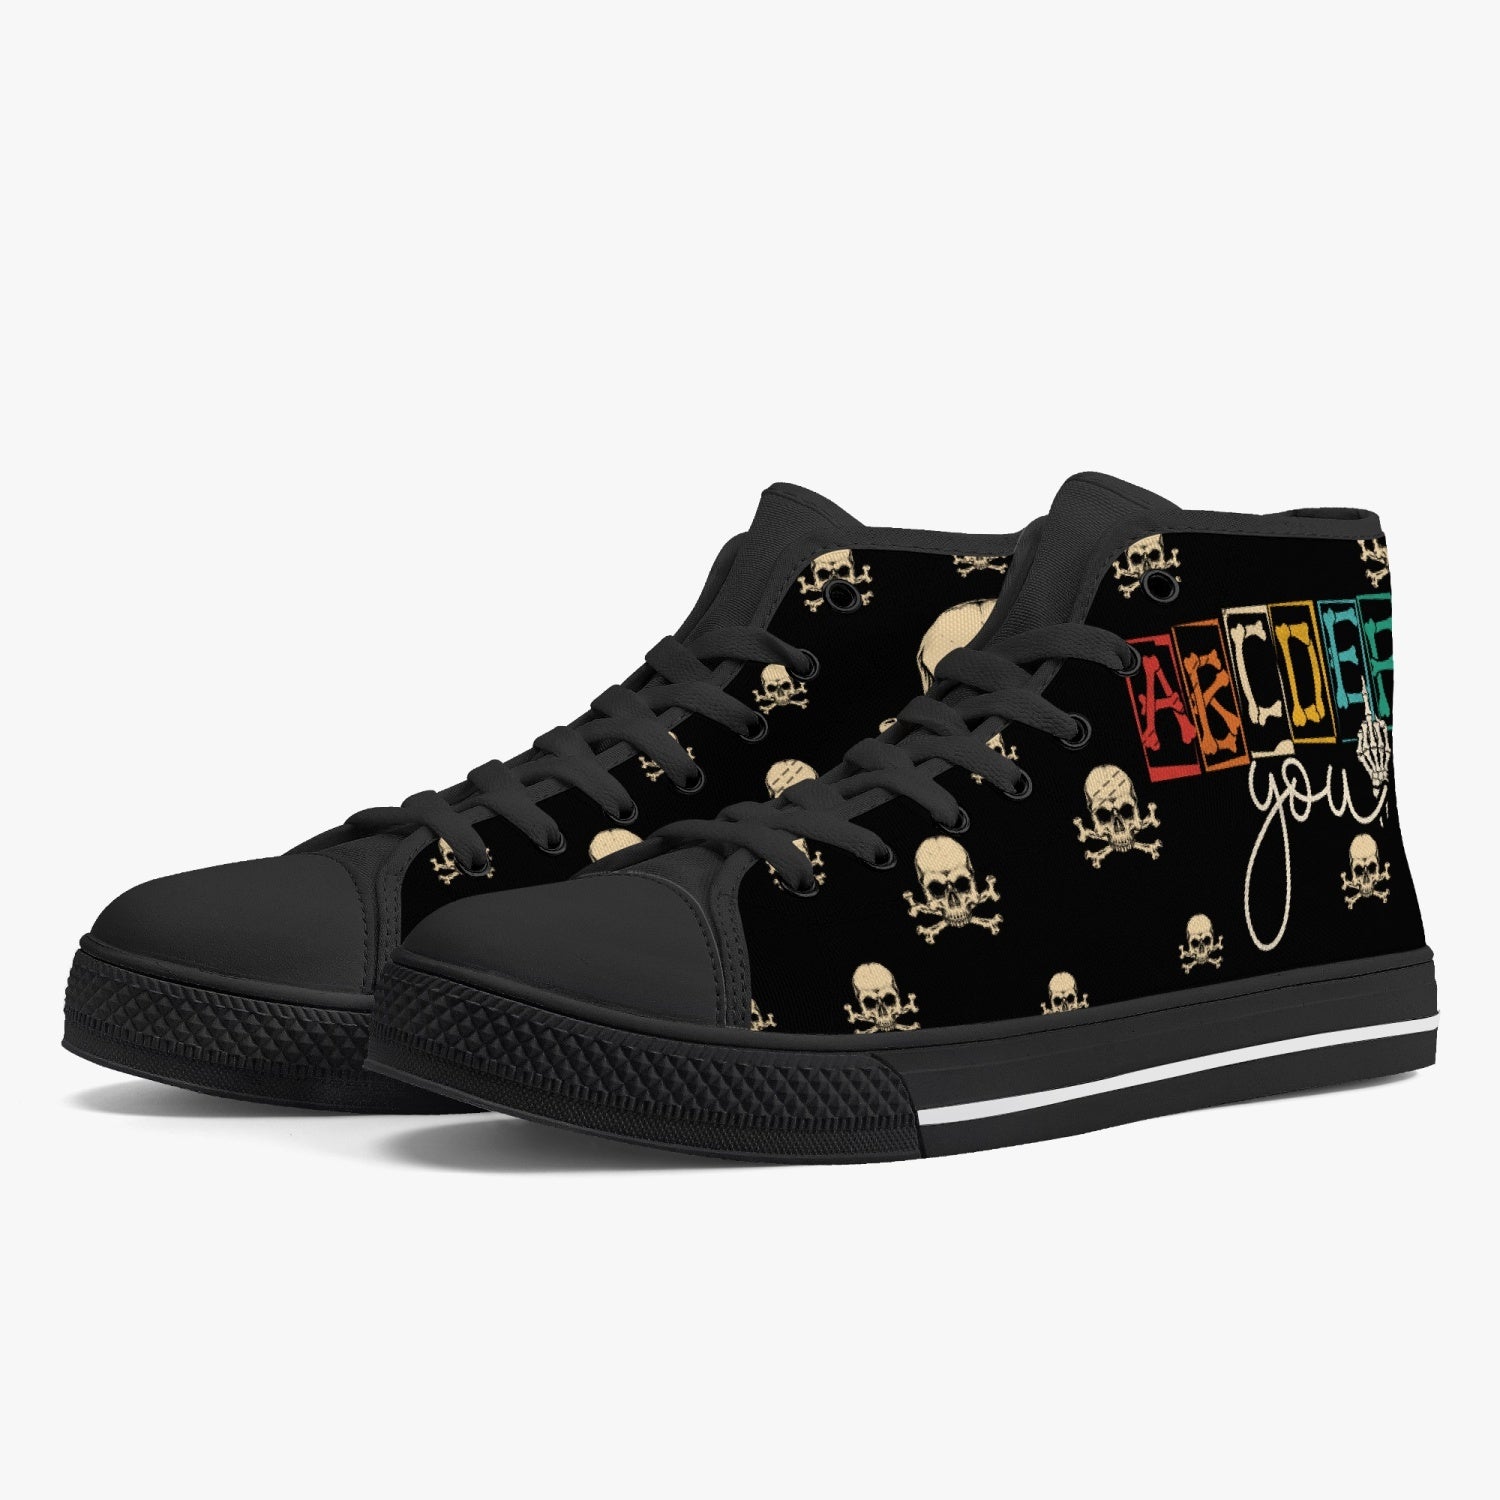 ABCDEF YOU HIGH TOP CANVAS SHOES - TY0510222